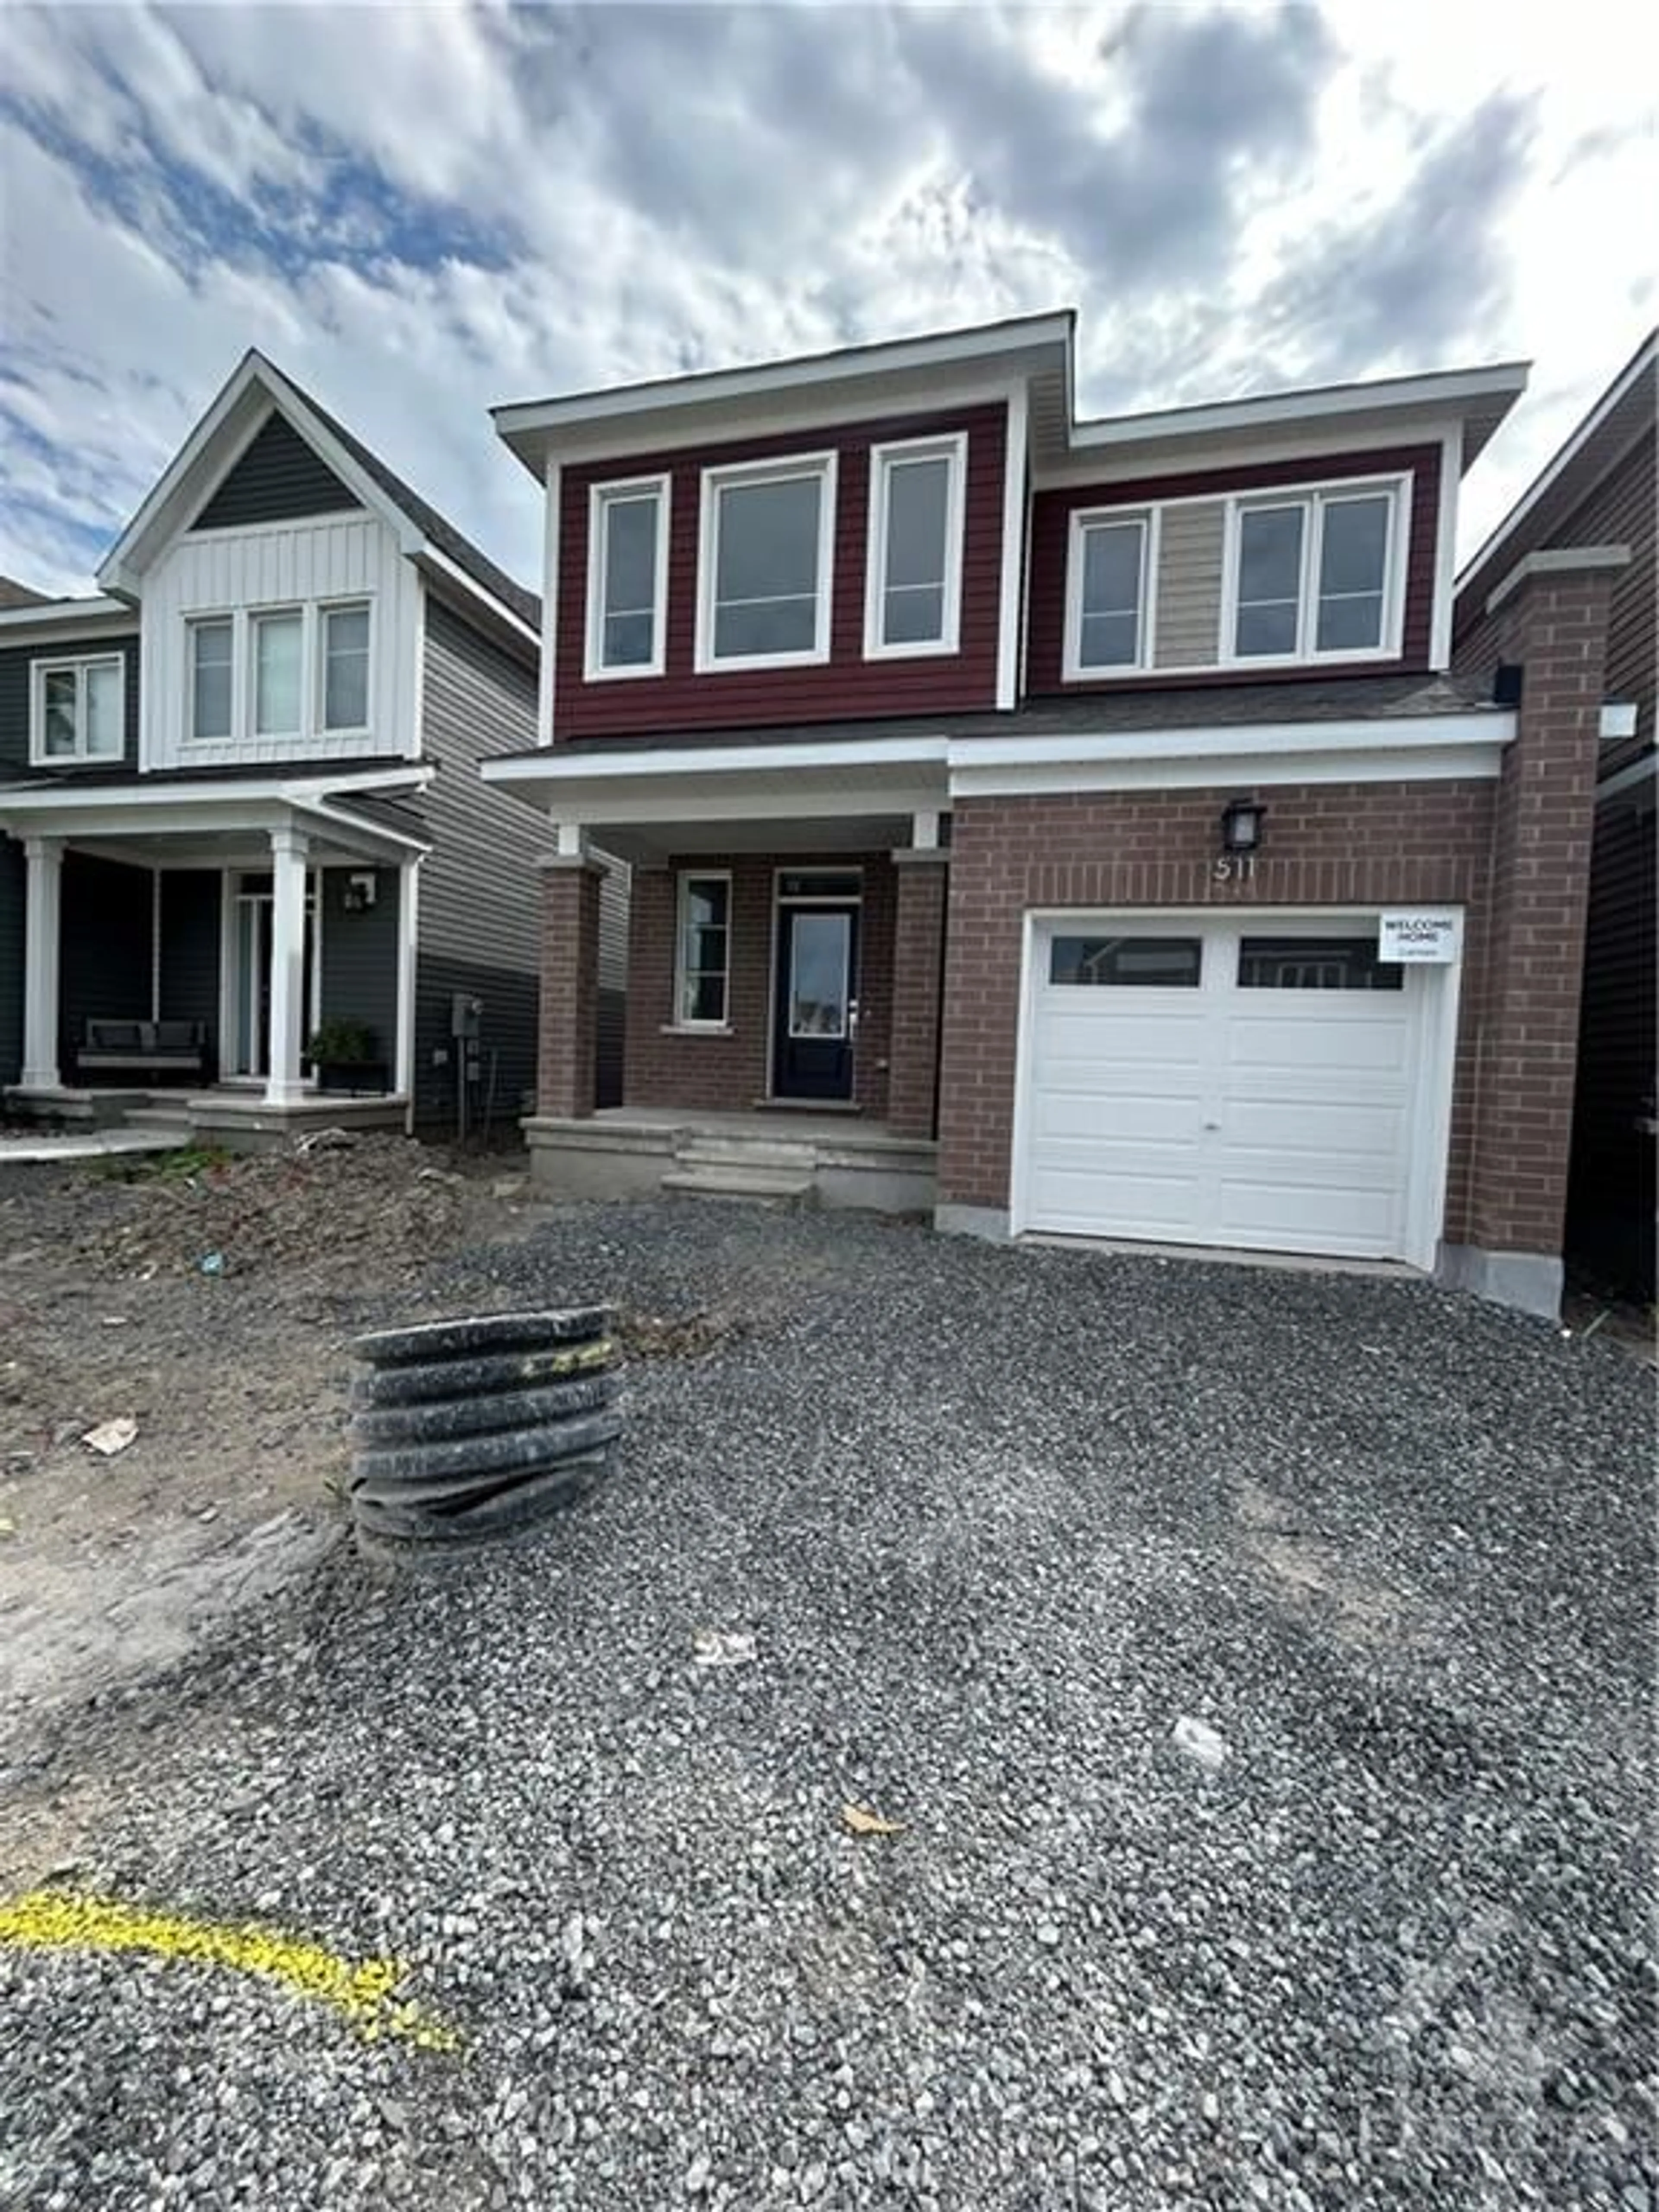 Home with brick exterior material for 511 OLDENBURG Ave, Richmond Ontario K0A 2Z0